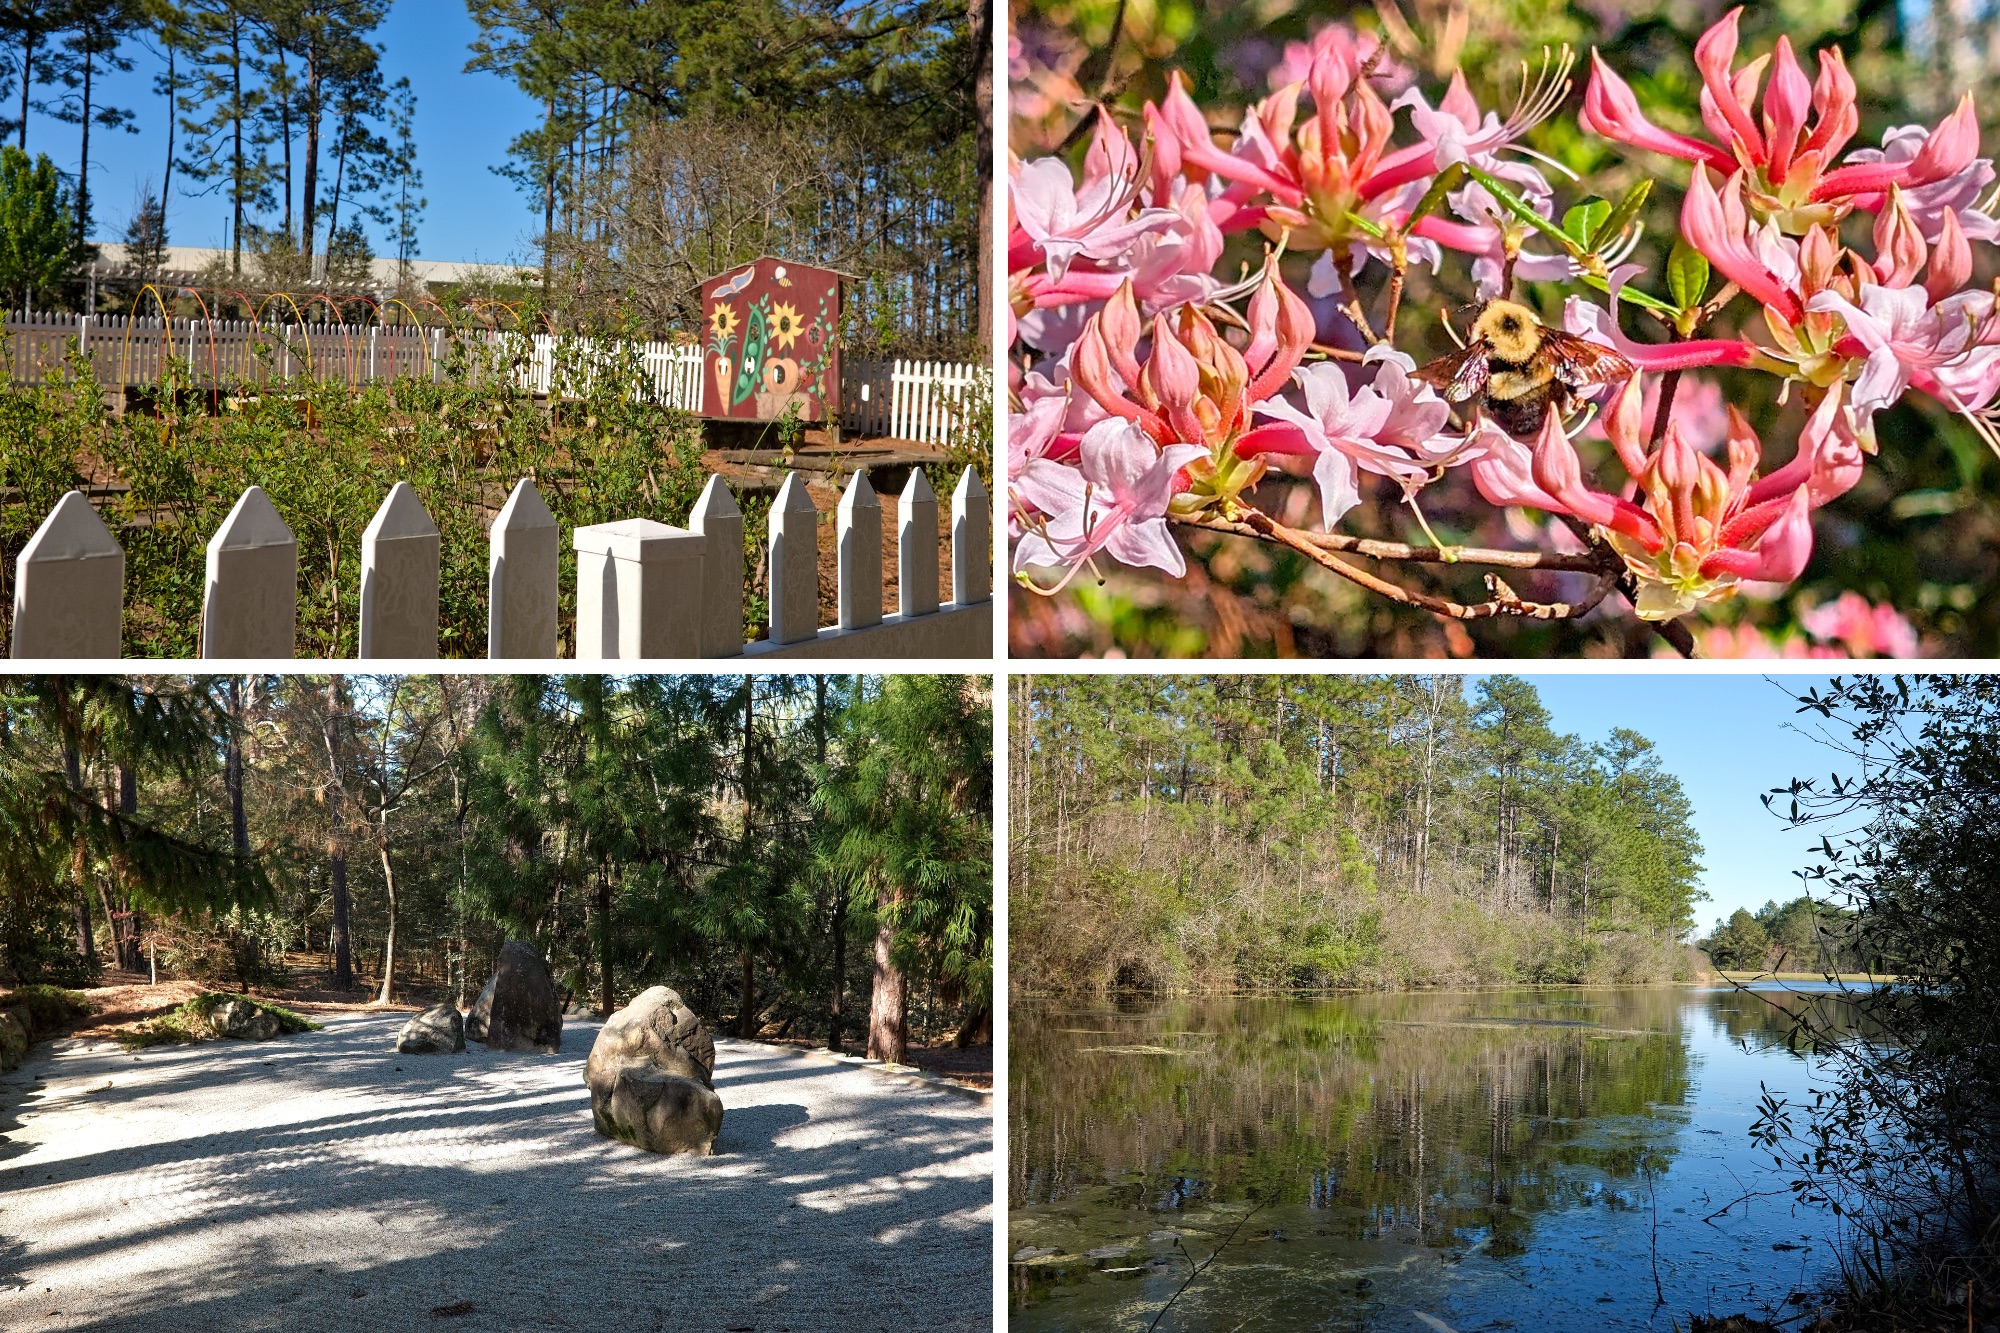 Four images from Sandhills Horticultural Gardens